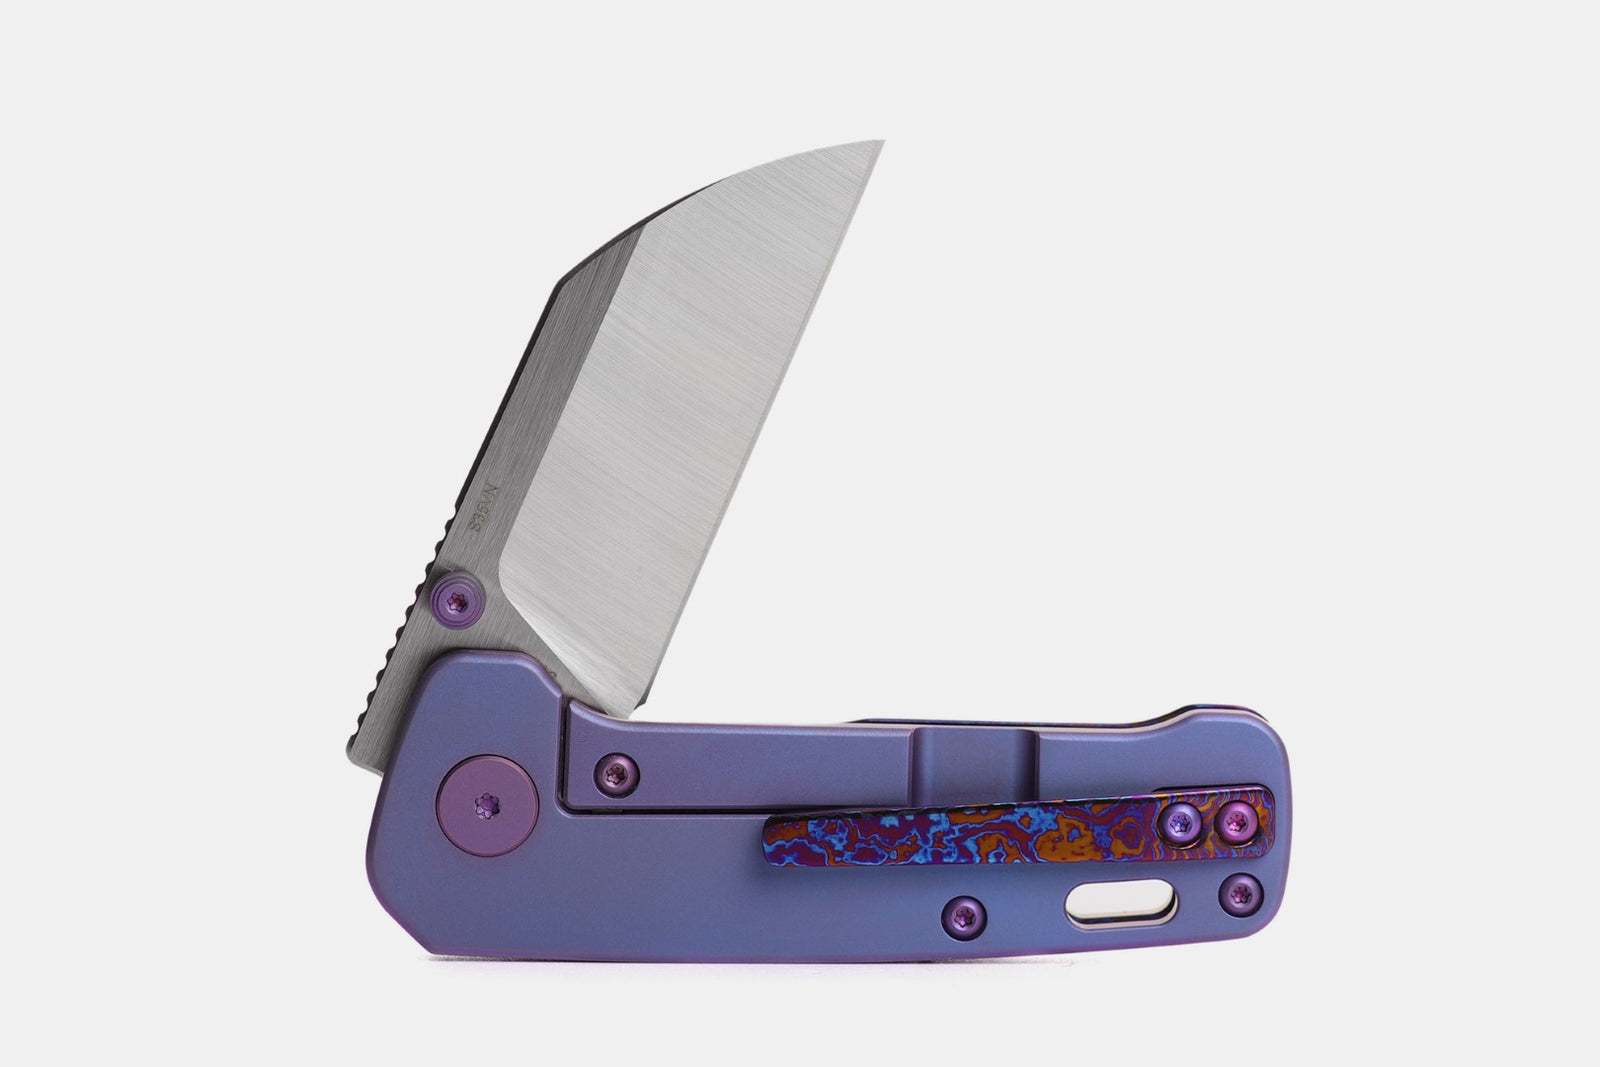 Kaviso x QSP Penguin Mini with full Mokuti show side and clip. Clip-side handle is purple anodized titanium with S35VN Satin blade and purple Ti hardware accents